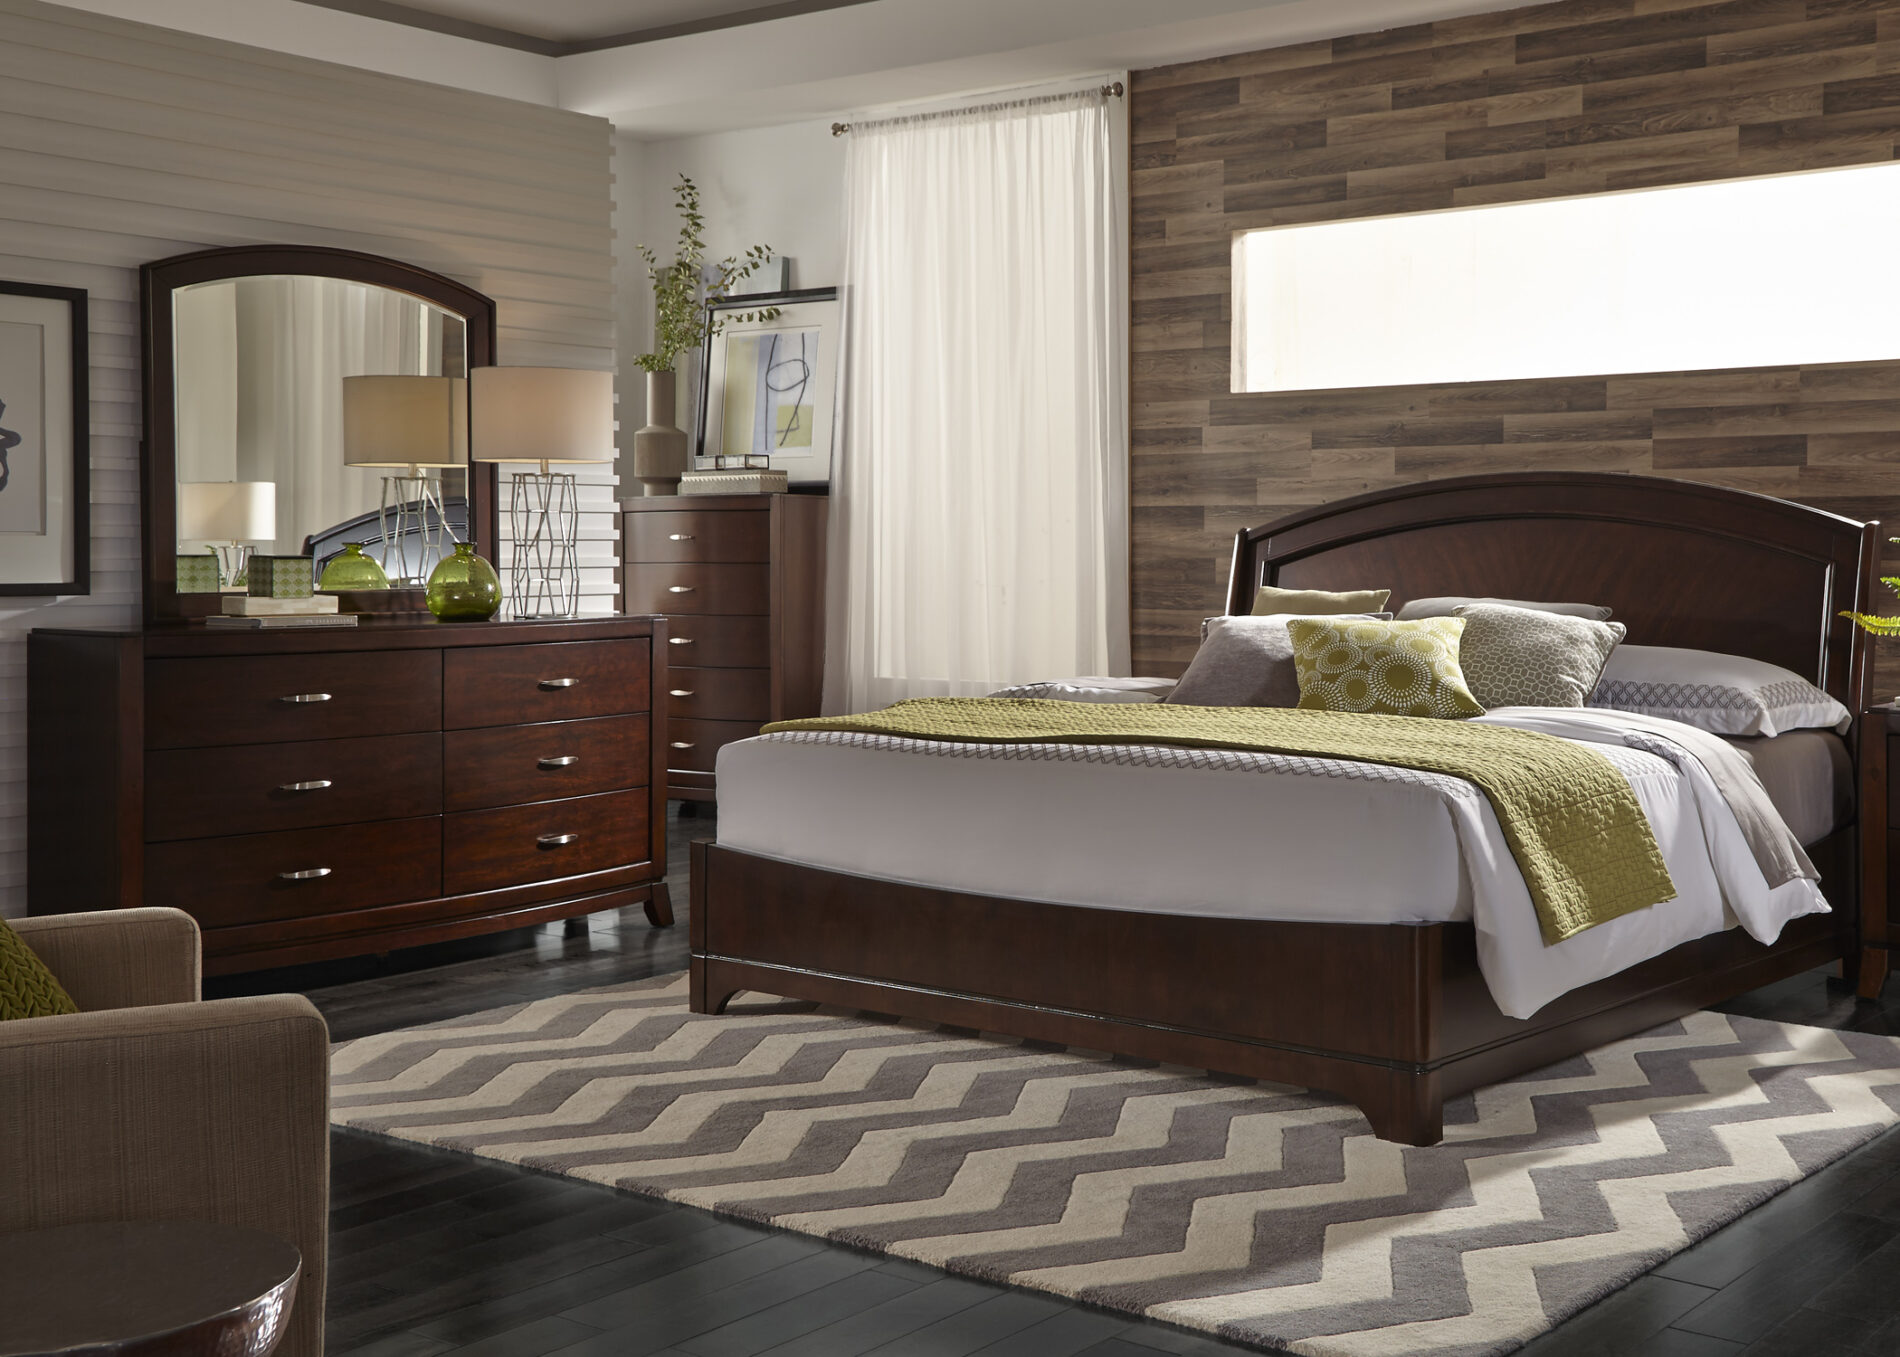 ailey king bedroom furniture collection